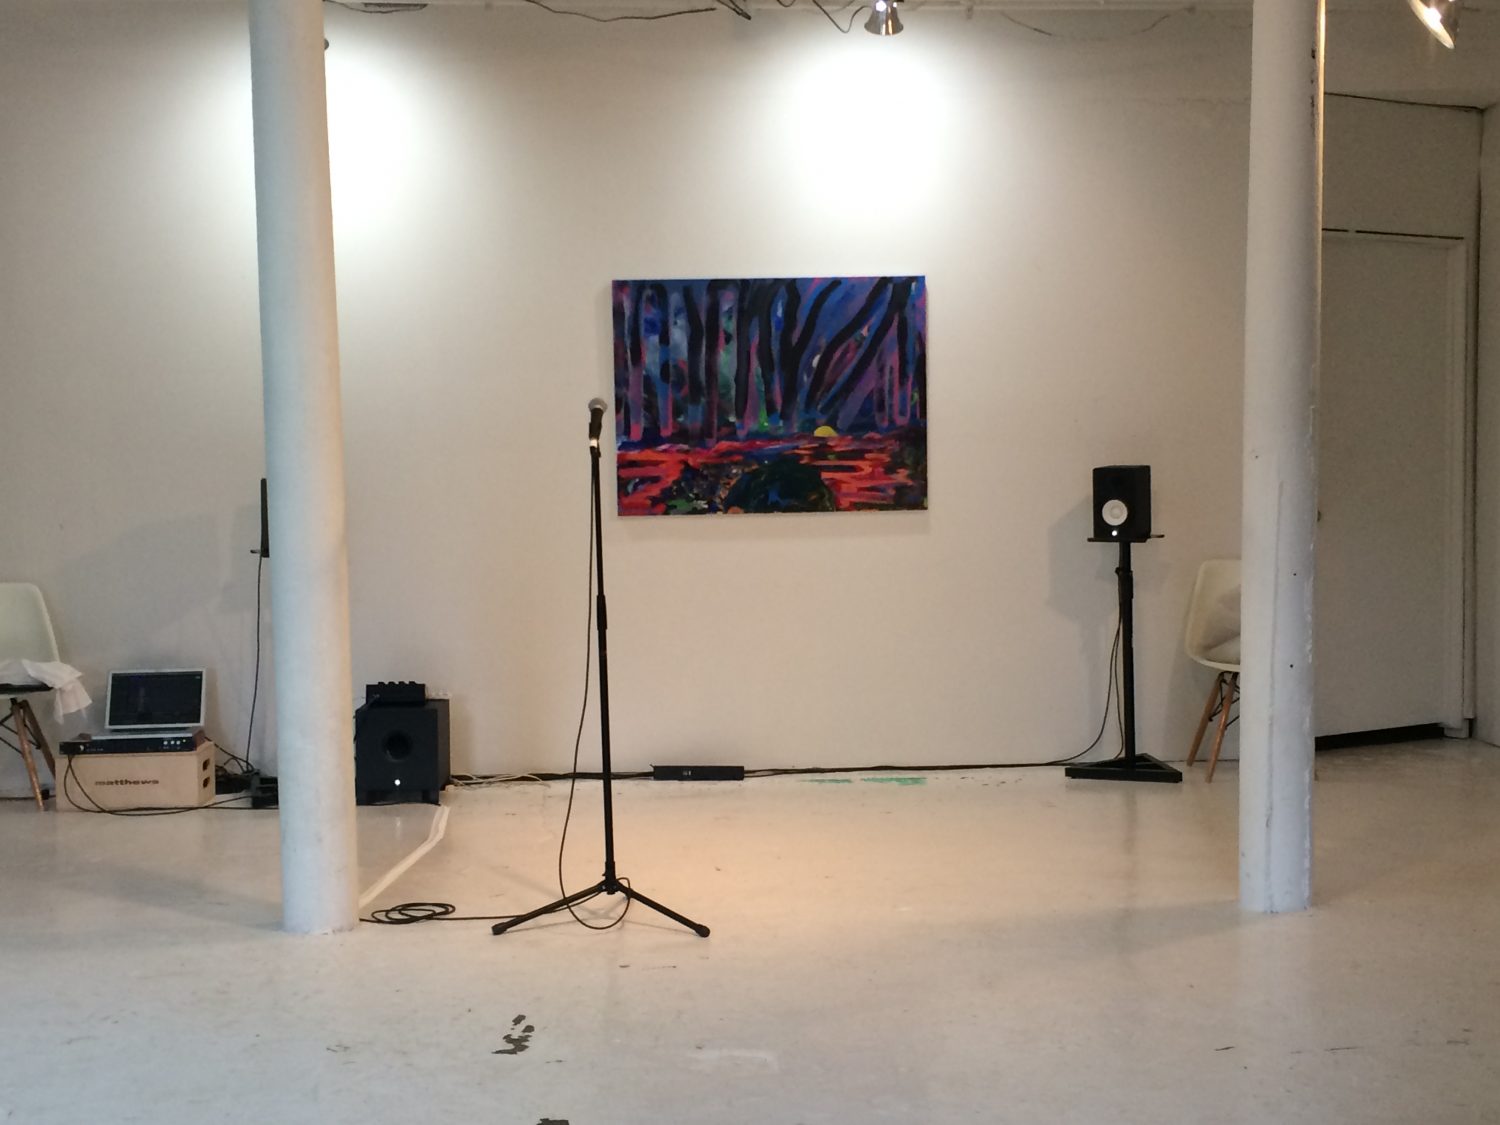 Setting up at Taaffe Gallery